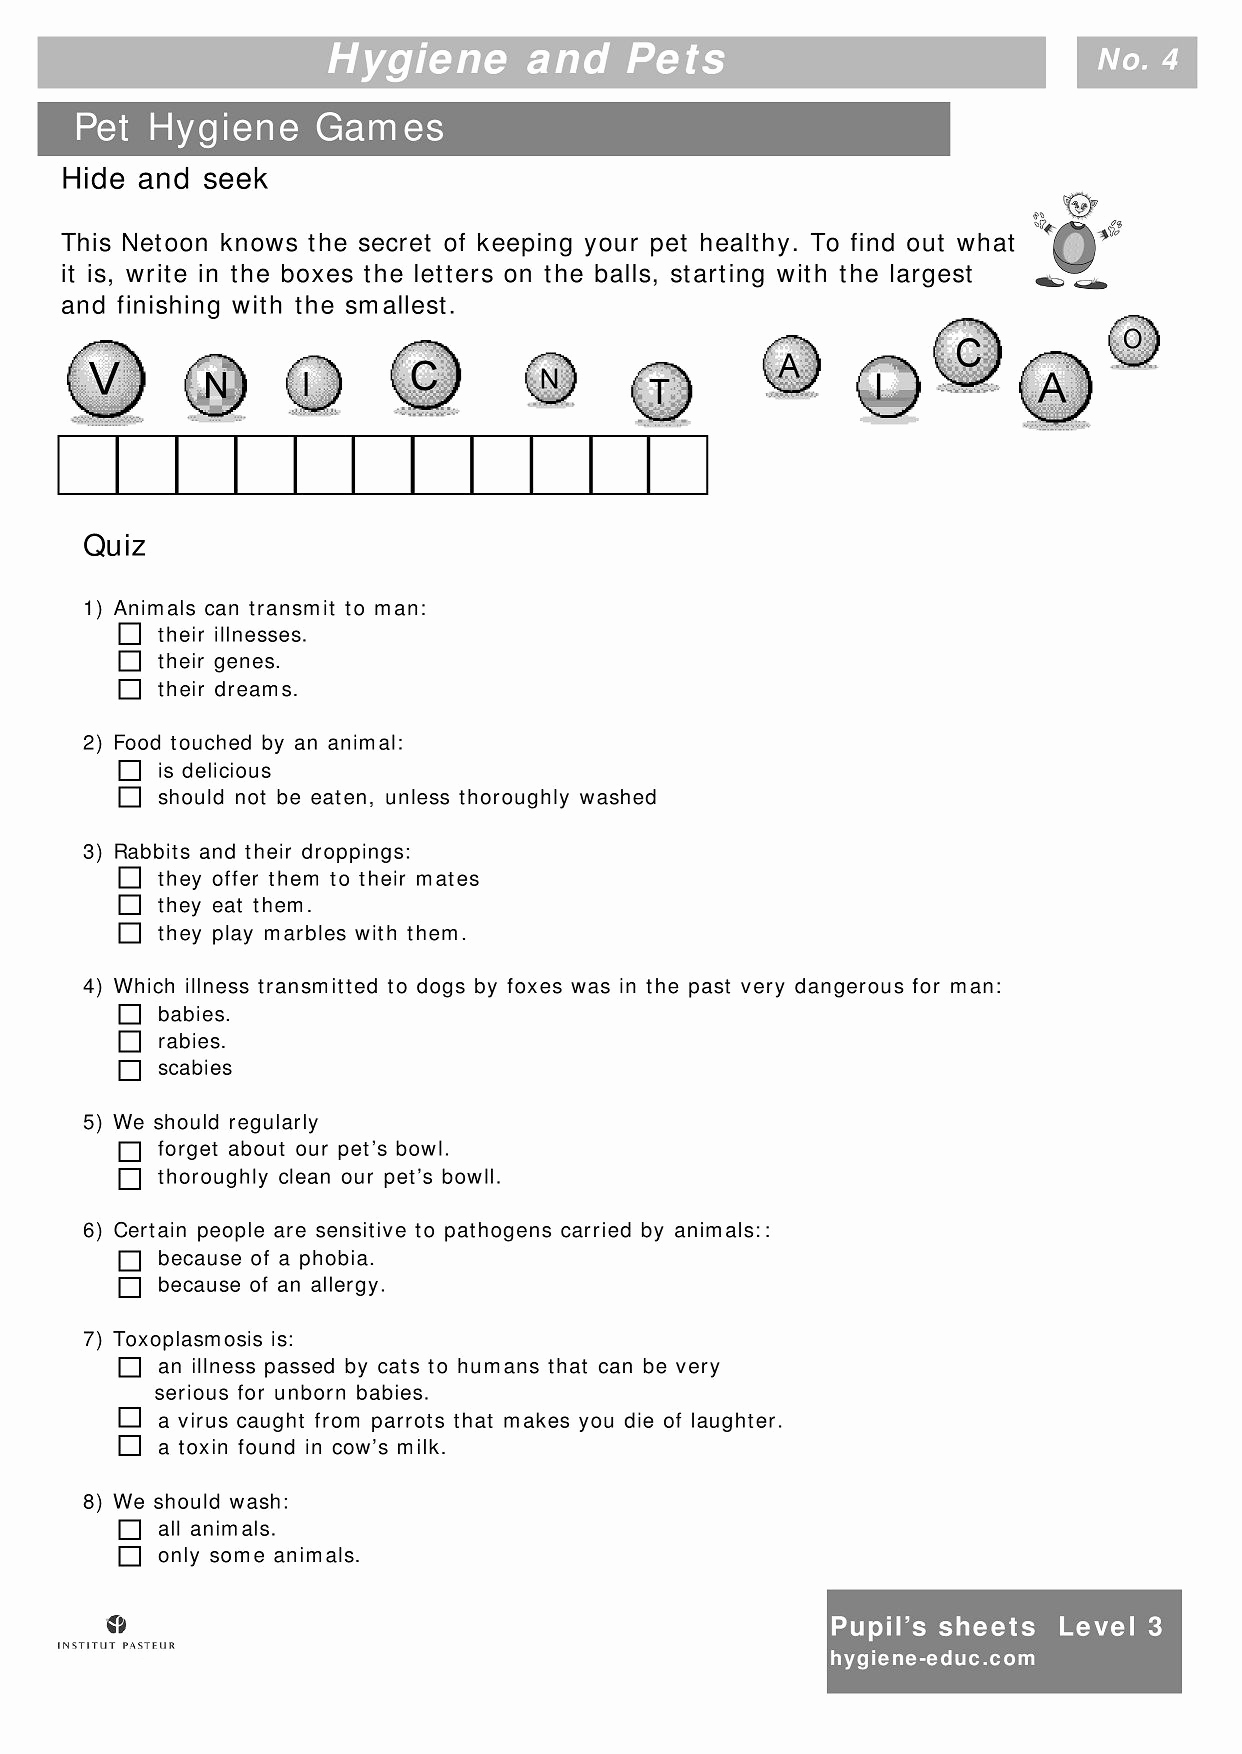 Middle School Health Worksheets Pdf New Middle School Health Worksheets Pdf